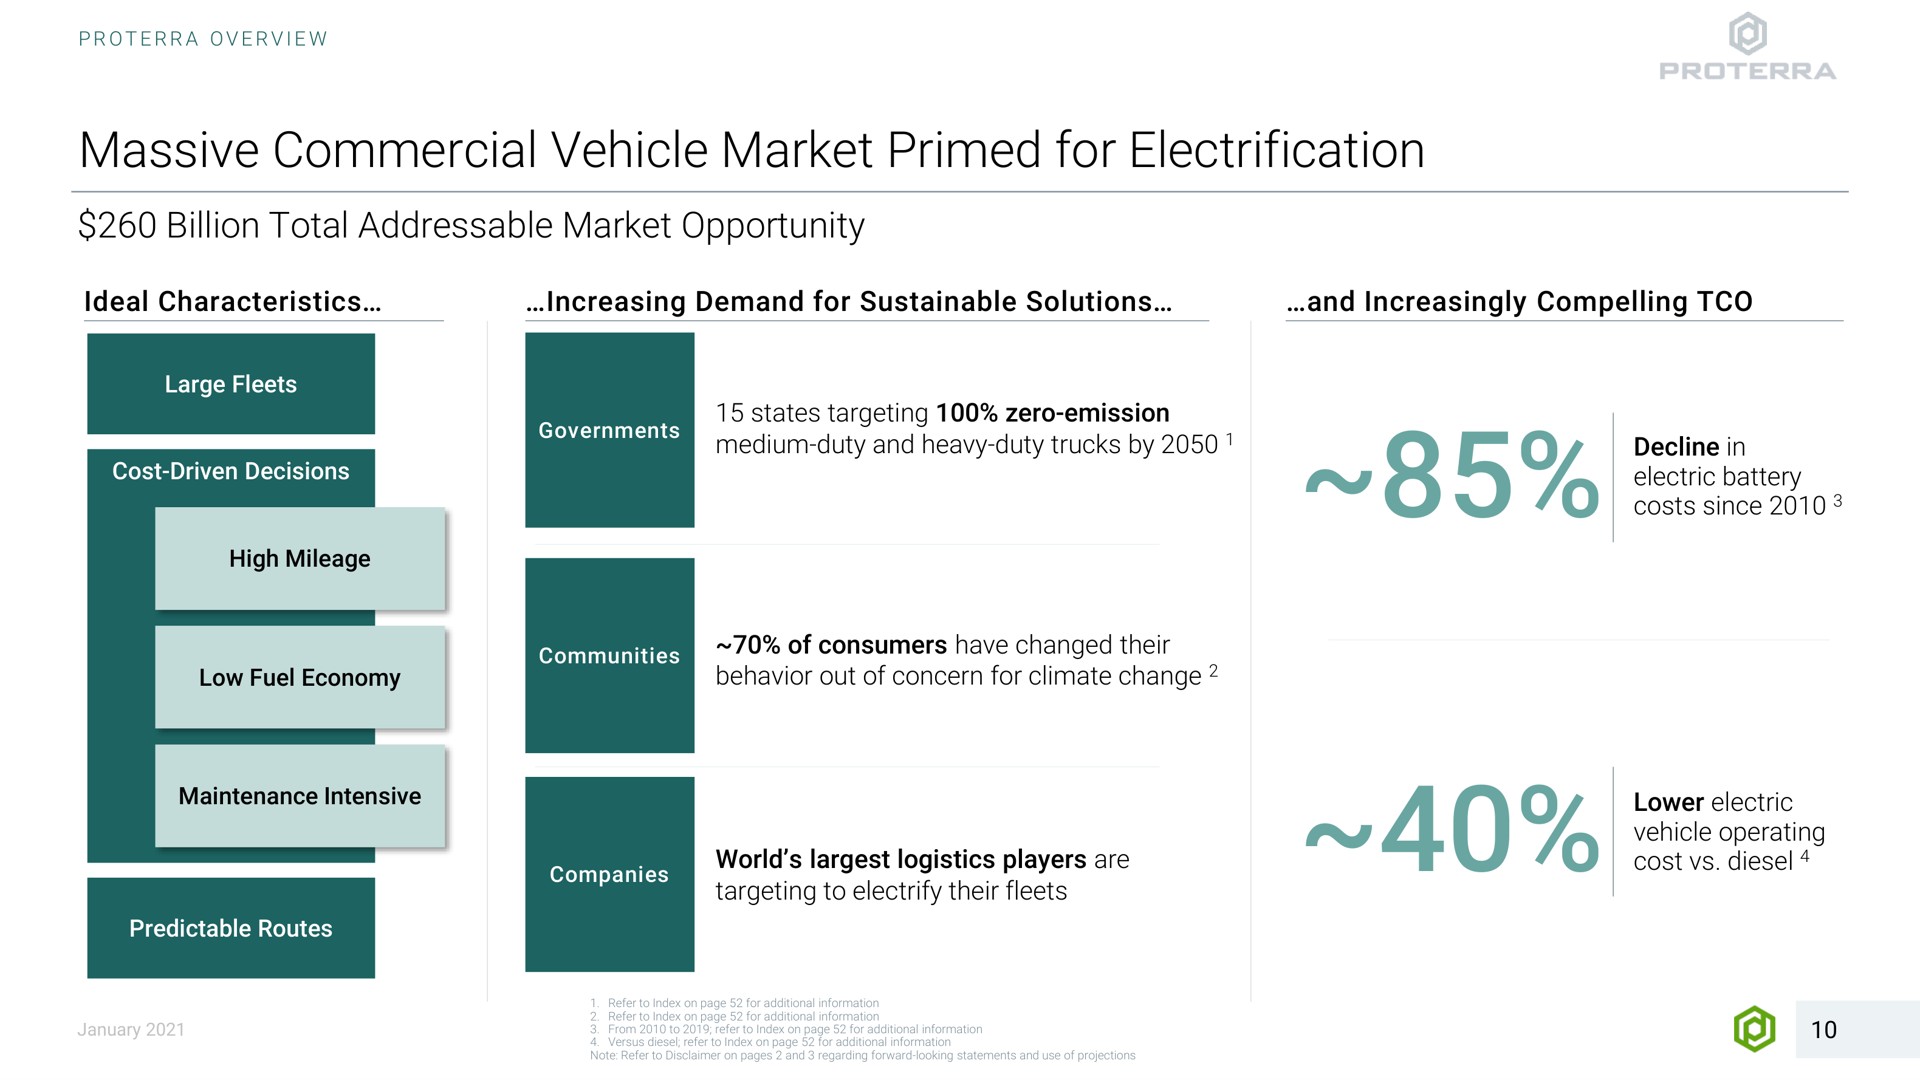 massive commercial vehicle market primed for electrification billion total opportunity ideal characteristics demand sustainable solutions and increasingly compelling cost driven decisions high mileage states targeting zero emission medium duty and heavy duty trucks by decline in electric battery costs since of consumers have changed their behavior out of concern climate change communities low fuel economy maintenance intensive predictable routes i a targeting to electrify their fleets world logistics players are lower electric operating cost diesel i | Proterra